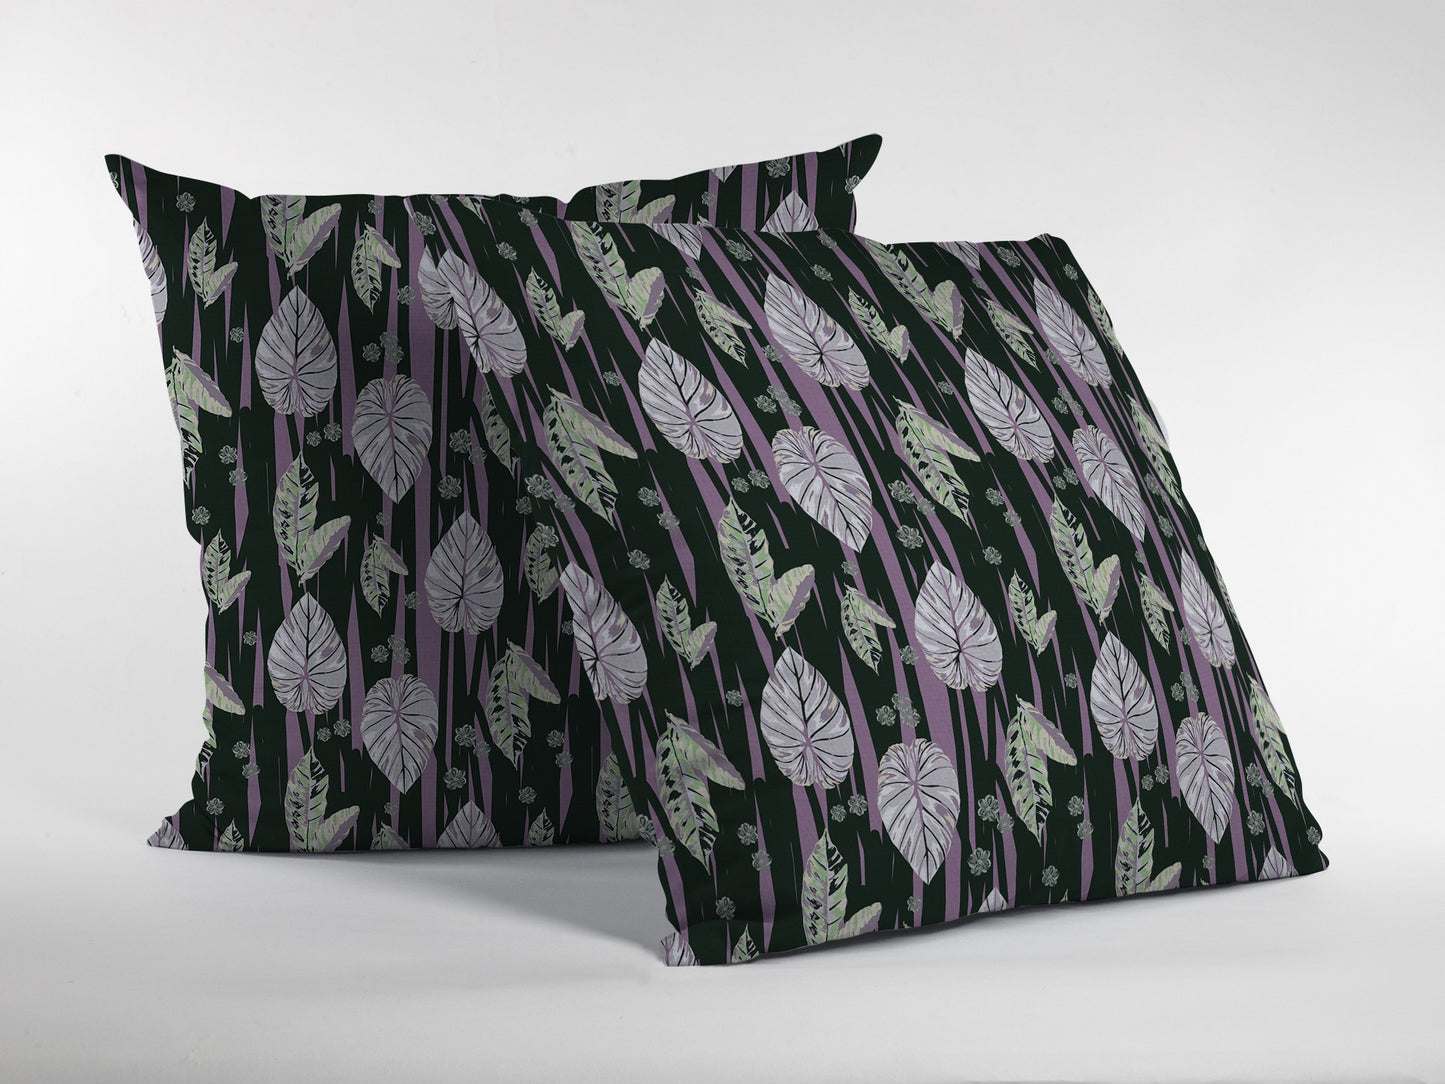 16” Black Purple Fall Leaves Suede Throw Pillow